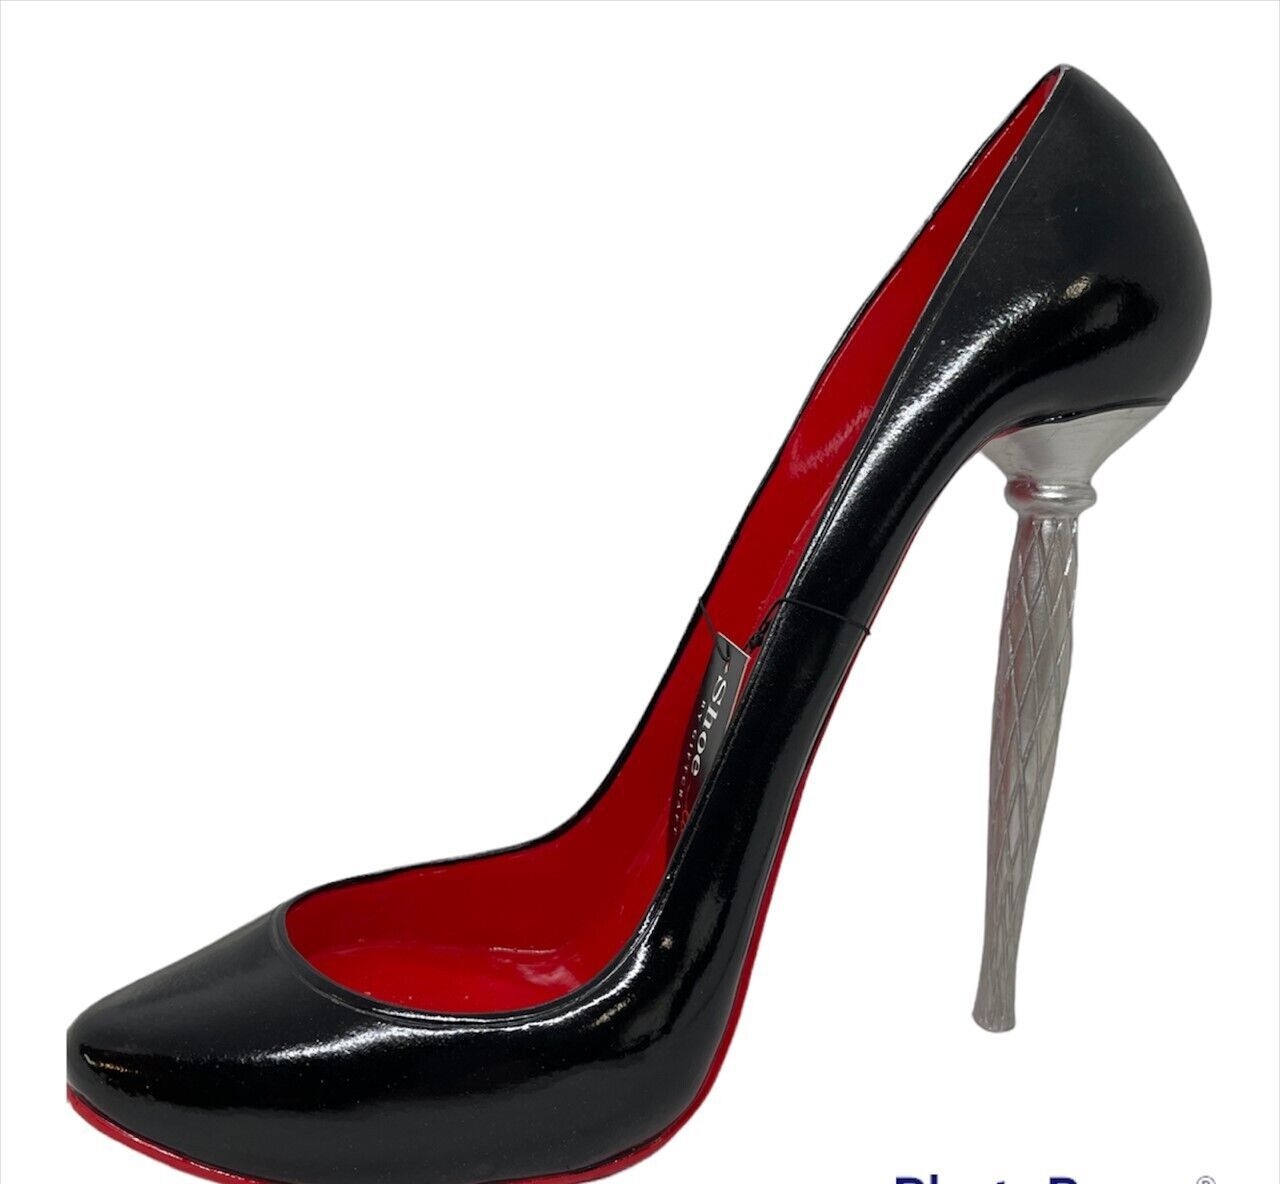 Stiletto Shoe Wine Bottle Holder Black Patent Leather Look With Red Bottom - $34.64